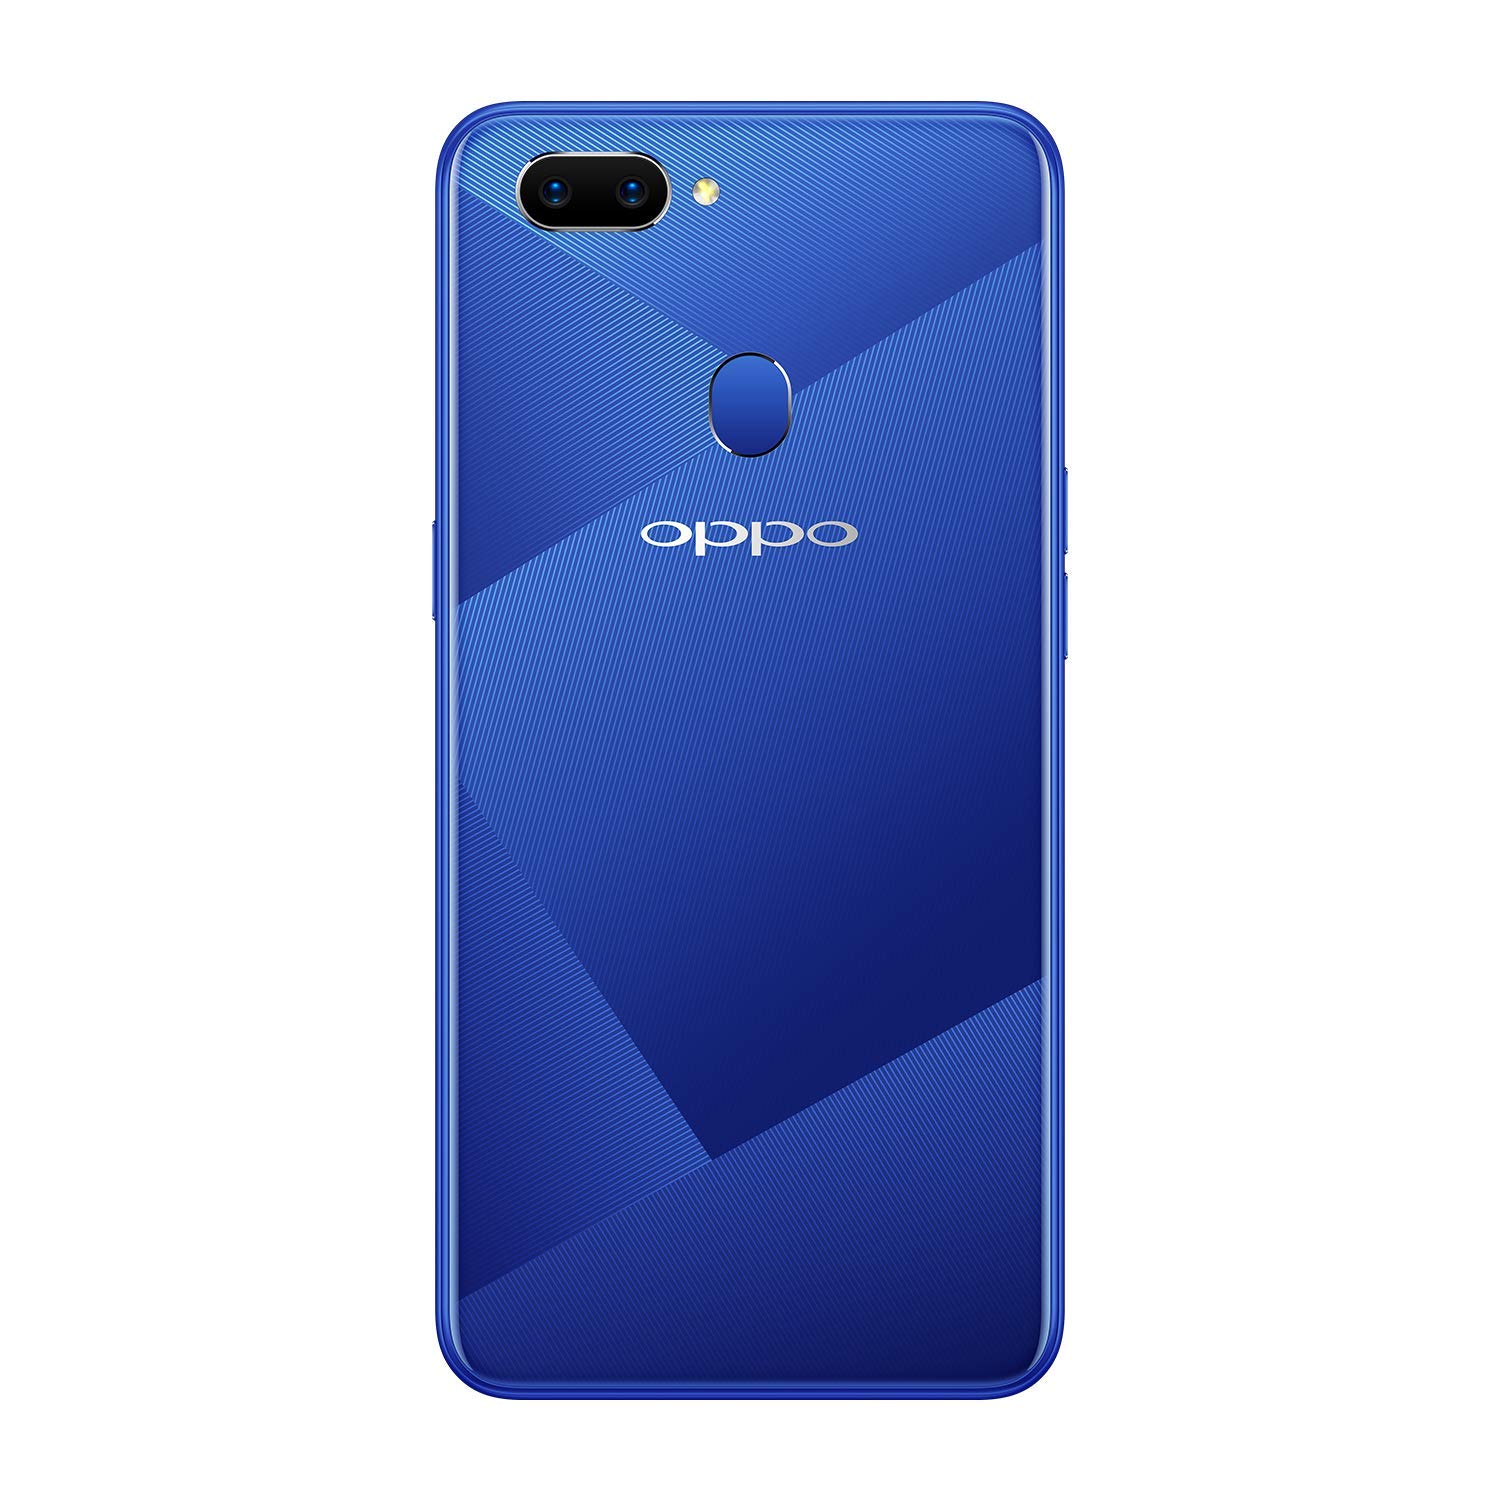 Oppo A5 Malaysia Price - Oppo A5 (2020) Price In Malaysia RM699 - MesraMobile : The phone one of the best options is performance, it is excellent and the.